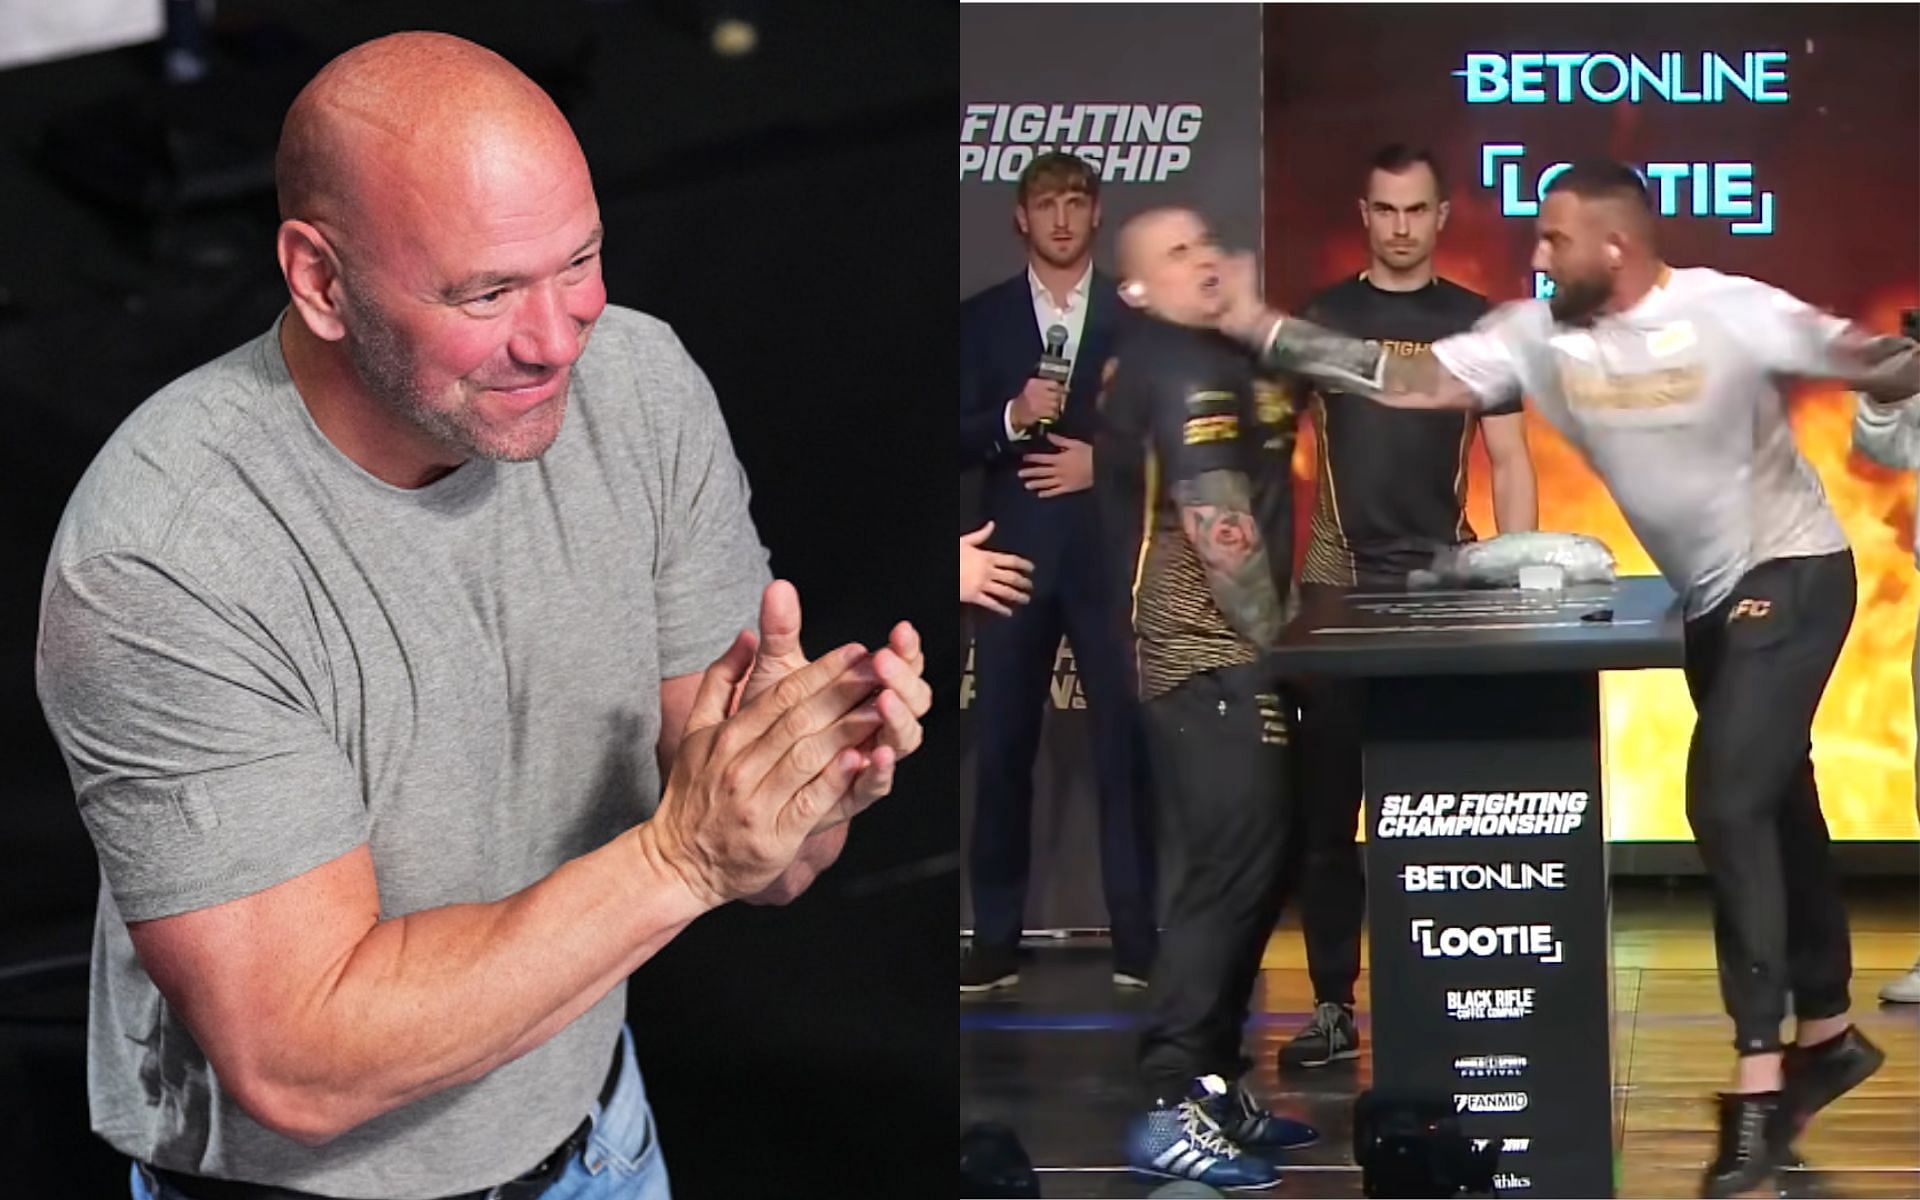 Dana White (left), Snipped from Slap Fighting Championship (right) [Images courtesy: Getty and Slap Fighting Championship via YouTube]